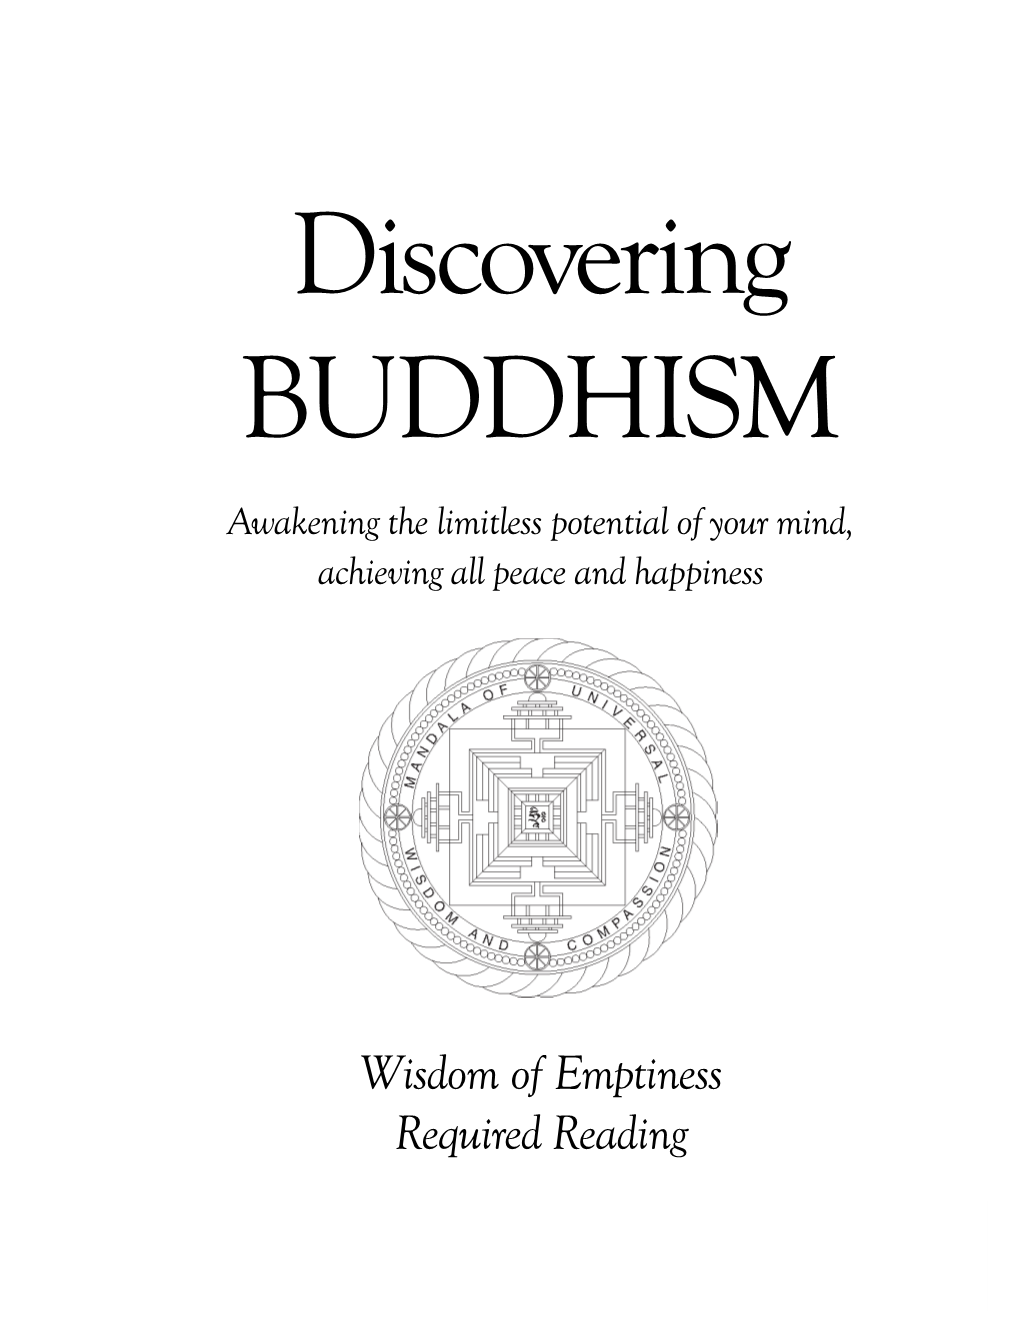 Wisdom of Emptiness Required Reading